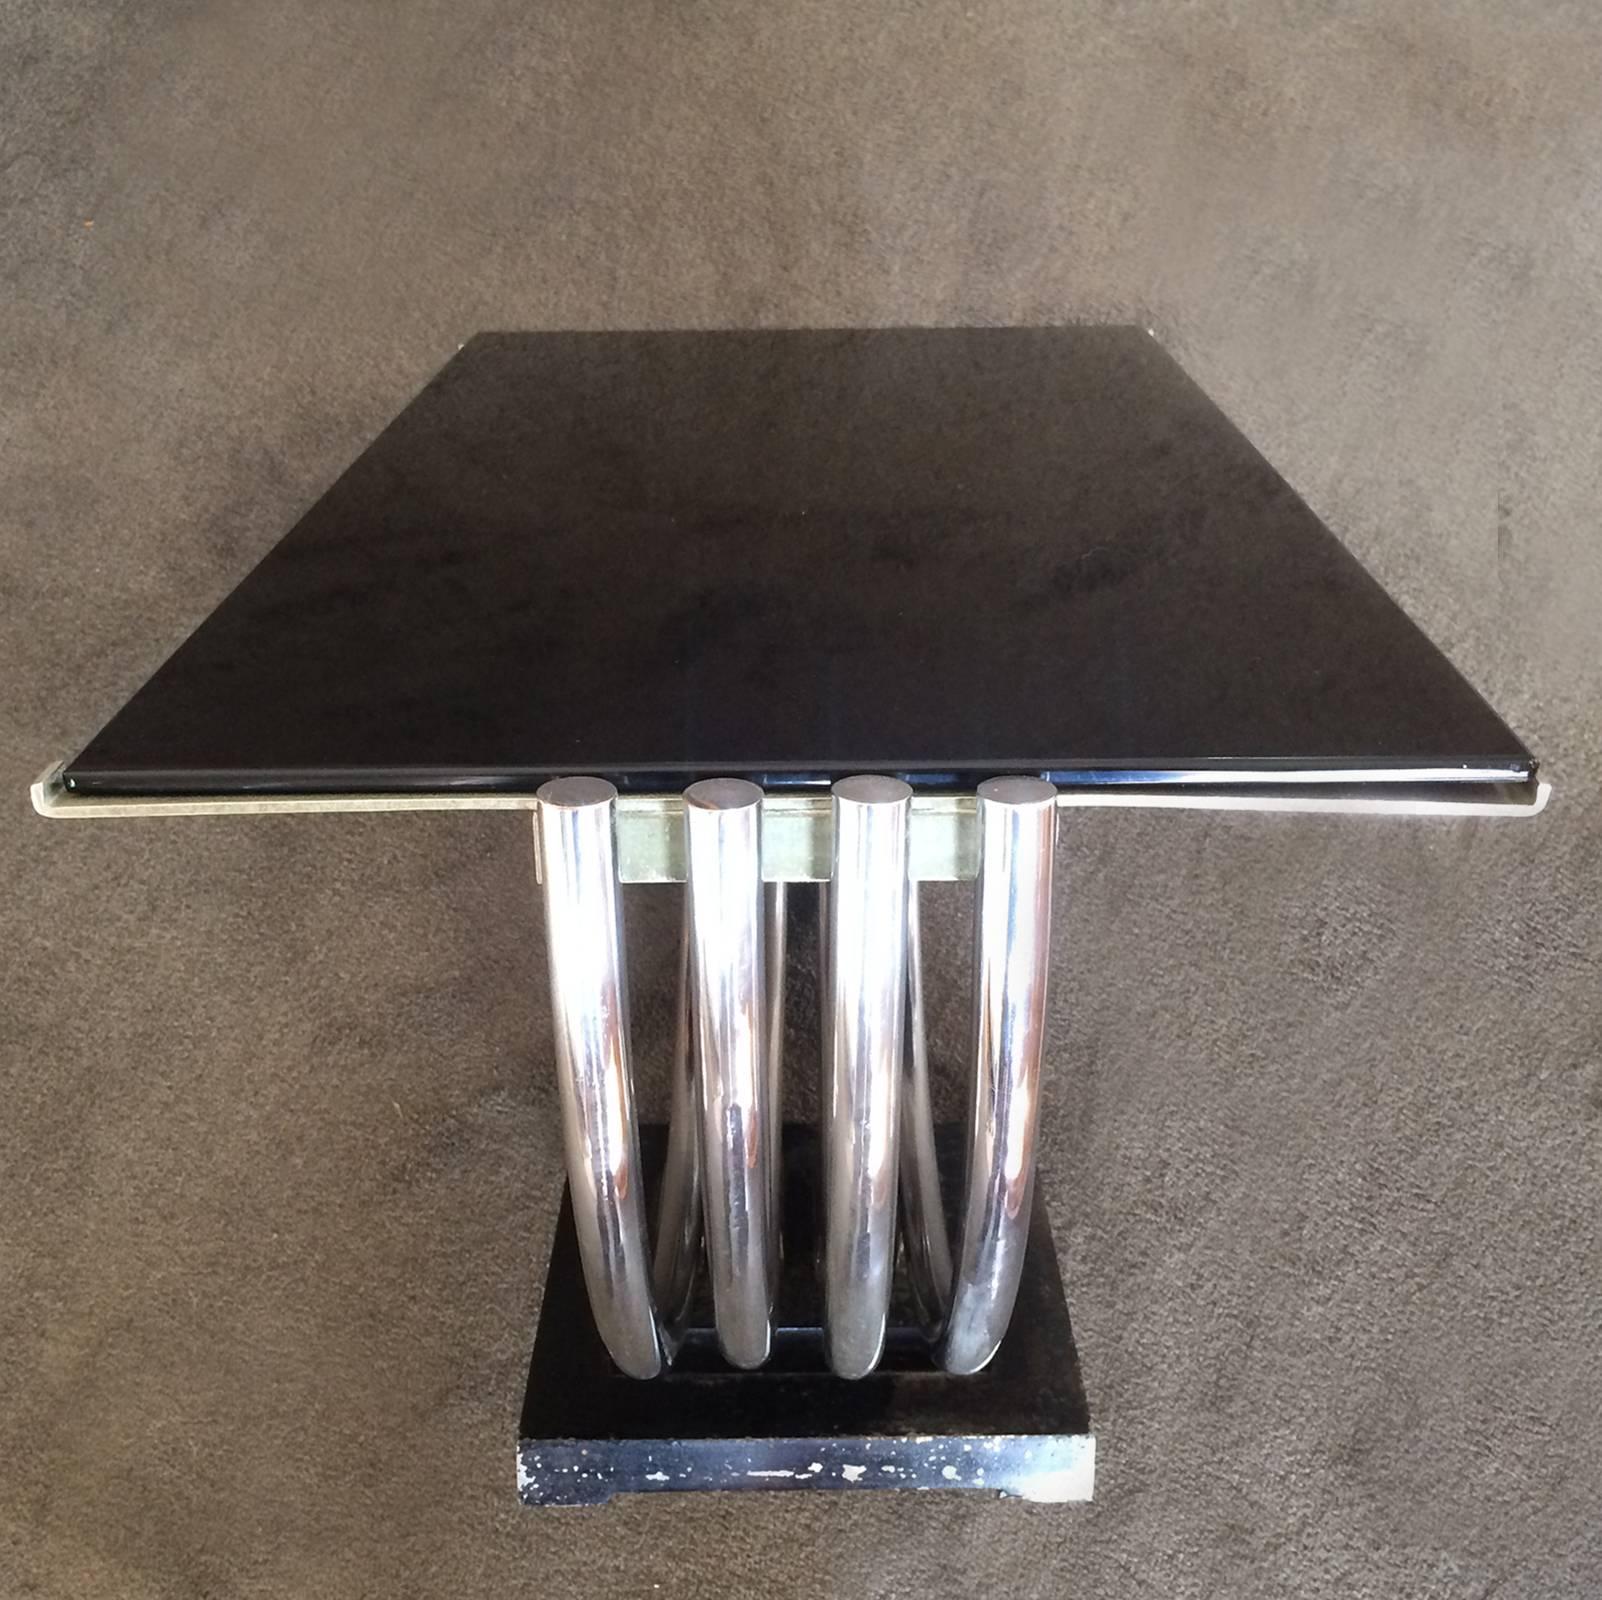 Art Deco table, Machine Age with four-piece, arched semicircle nickel plated tubular supports, with lipped end restraints at the two ends to hold the top; all on a triple stepped, solid iron base, and the original black Vitrolite to top. Original